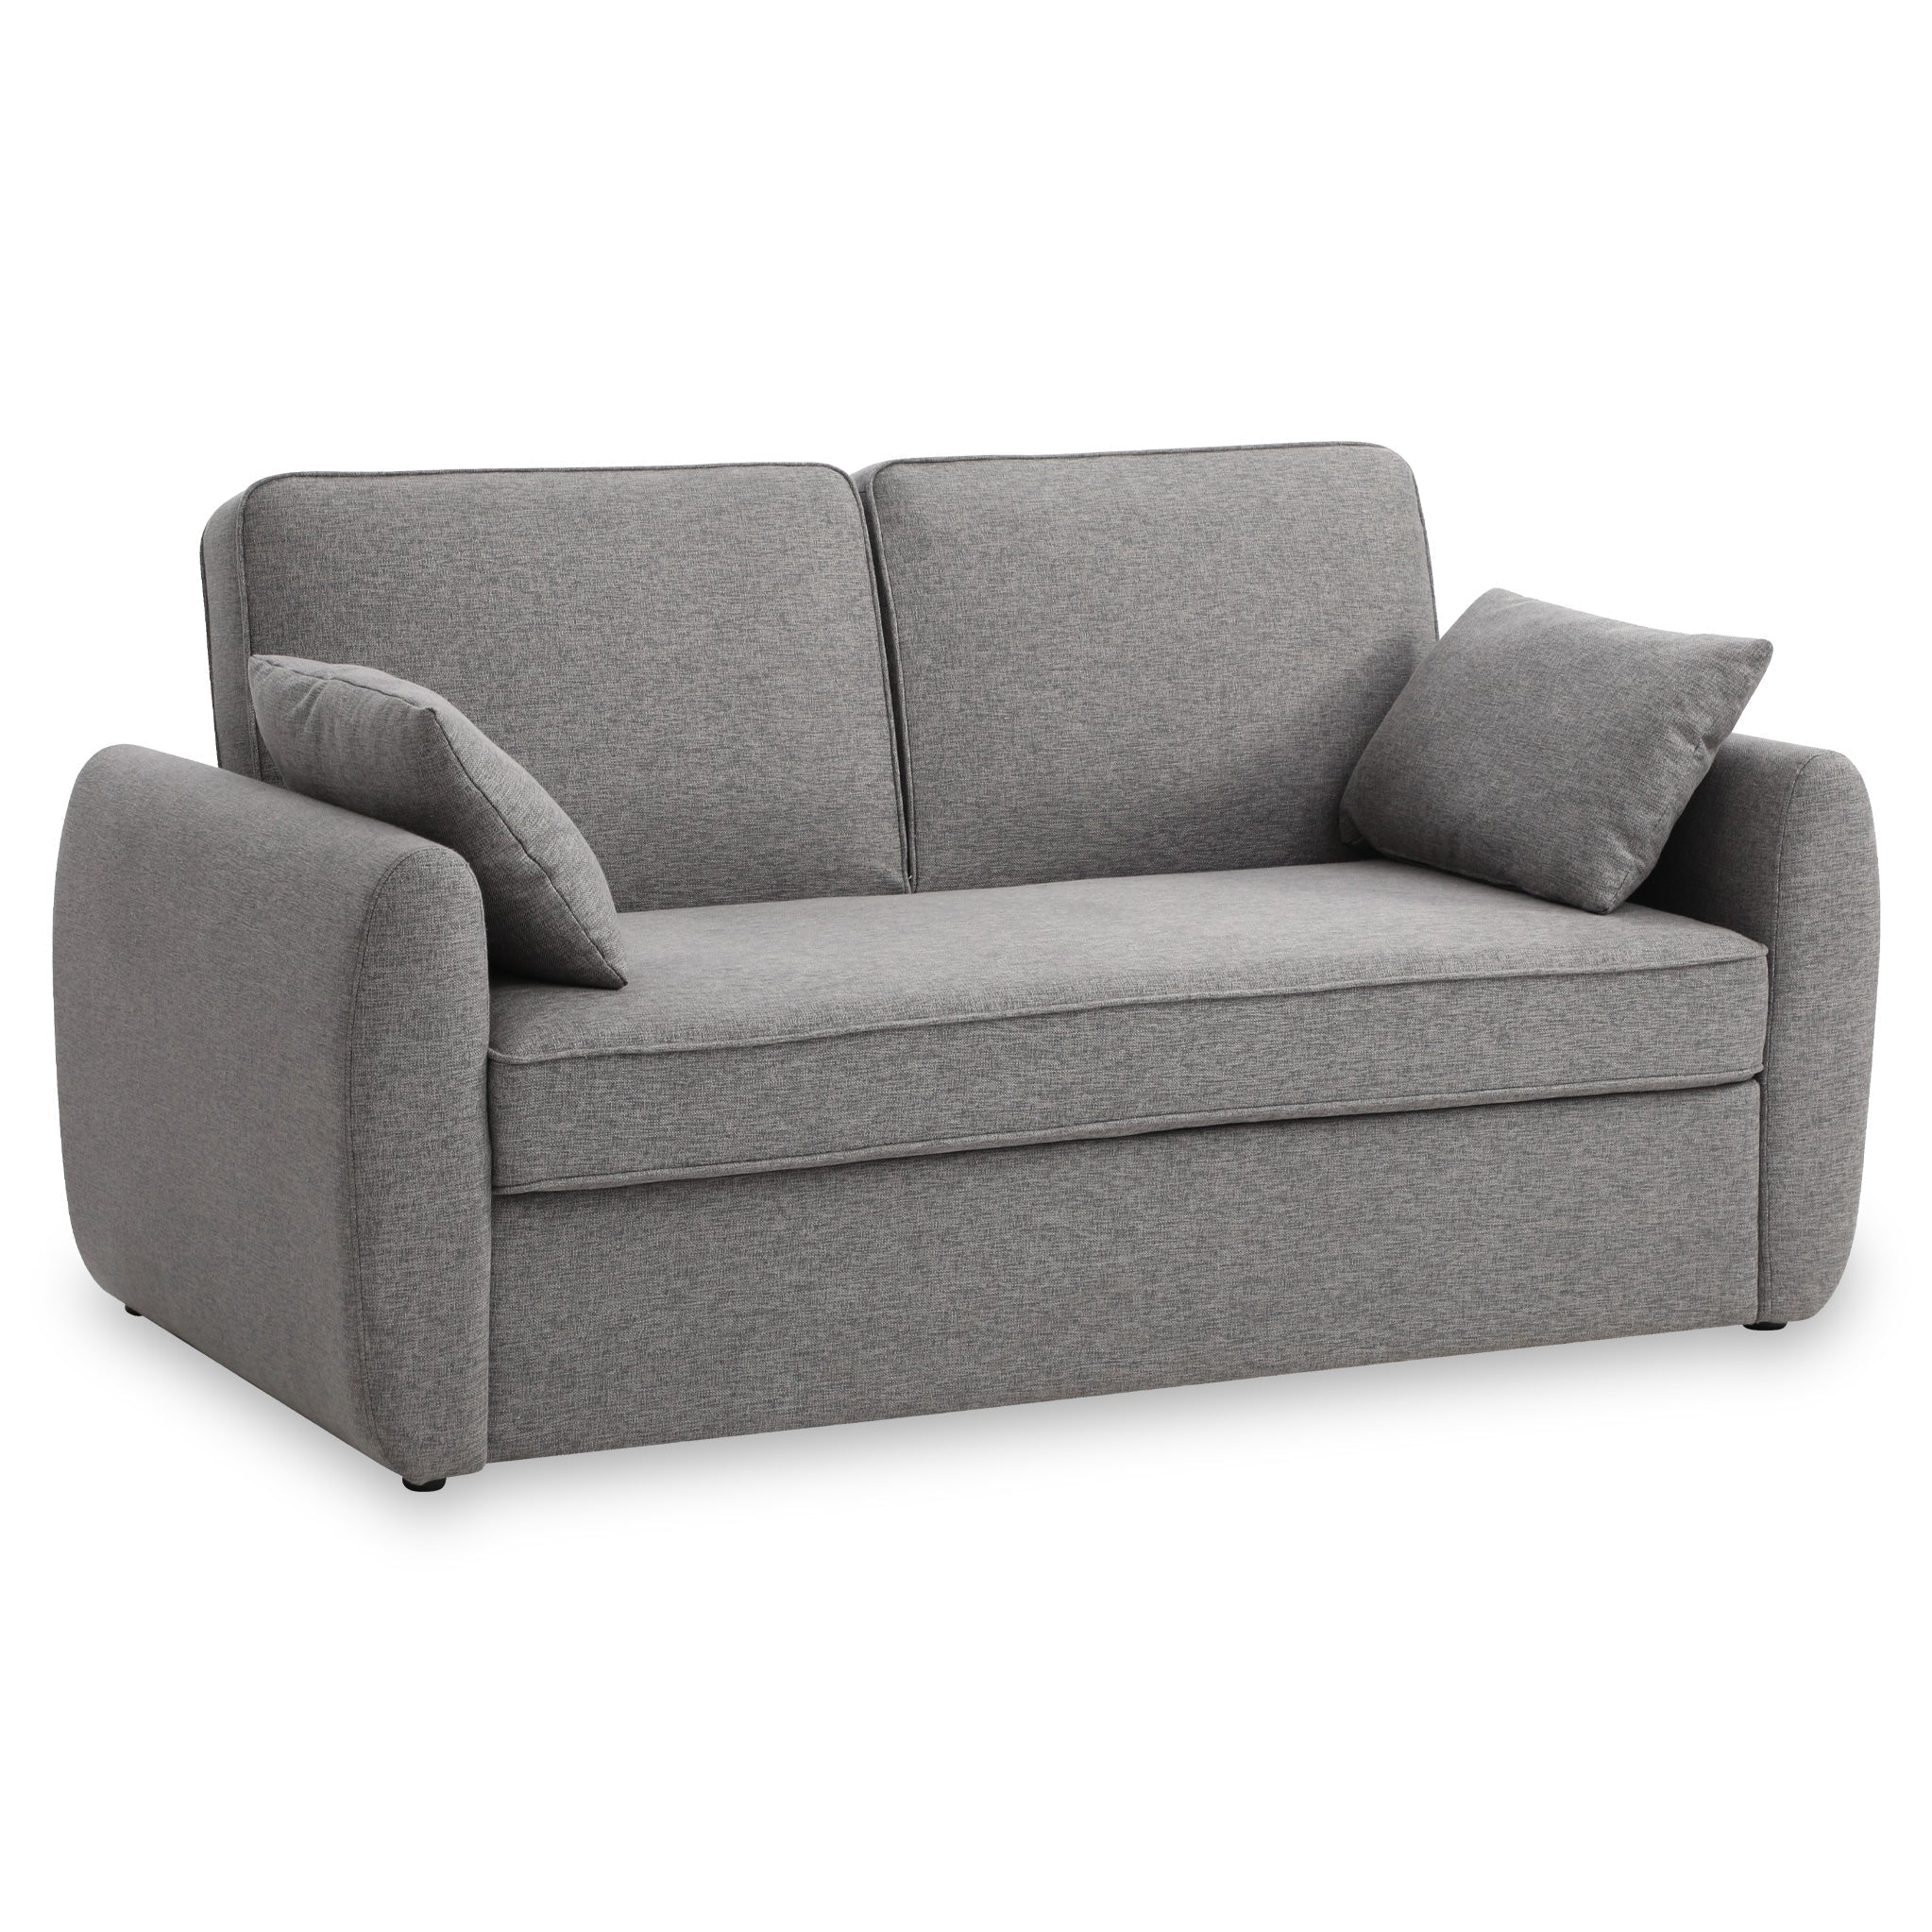 Naomi Grey 2 Seater Pop Up Sofa Bed For Living Room Roseland